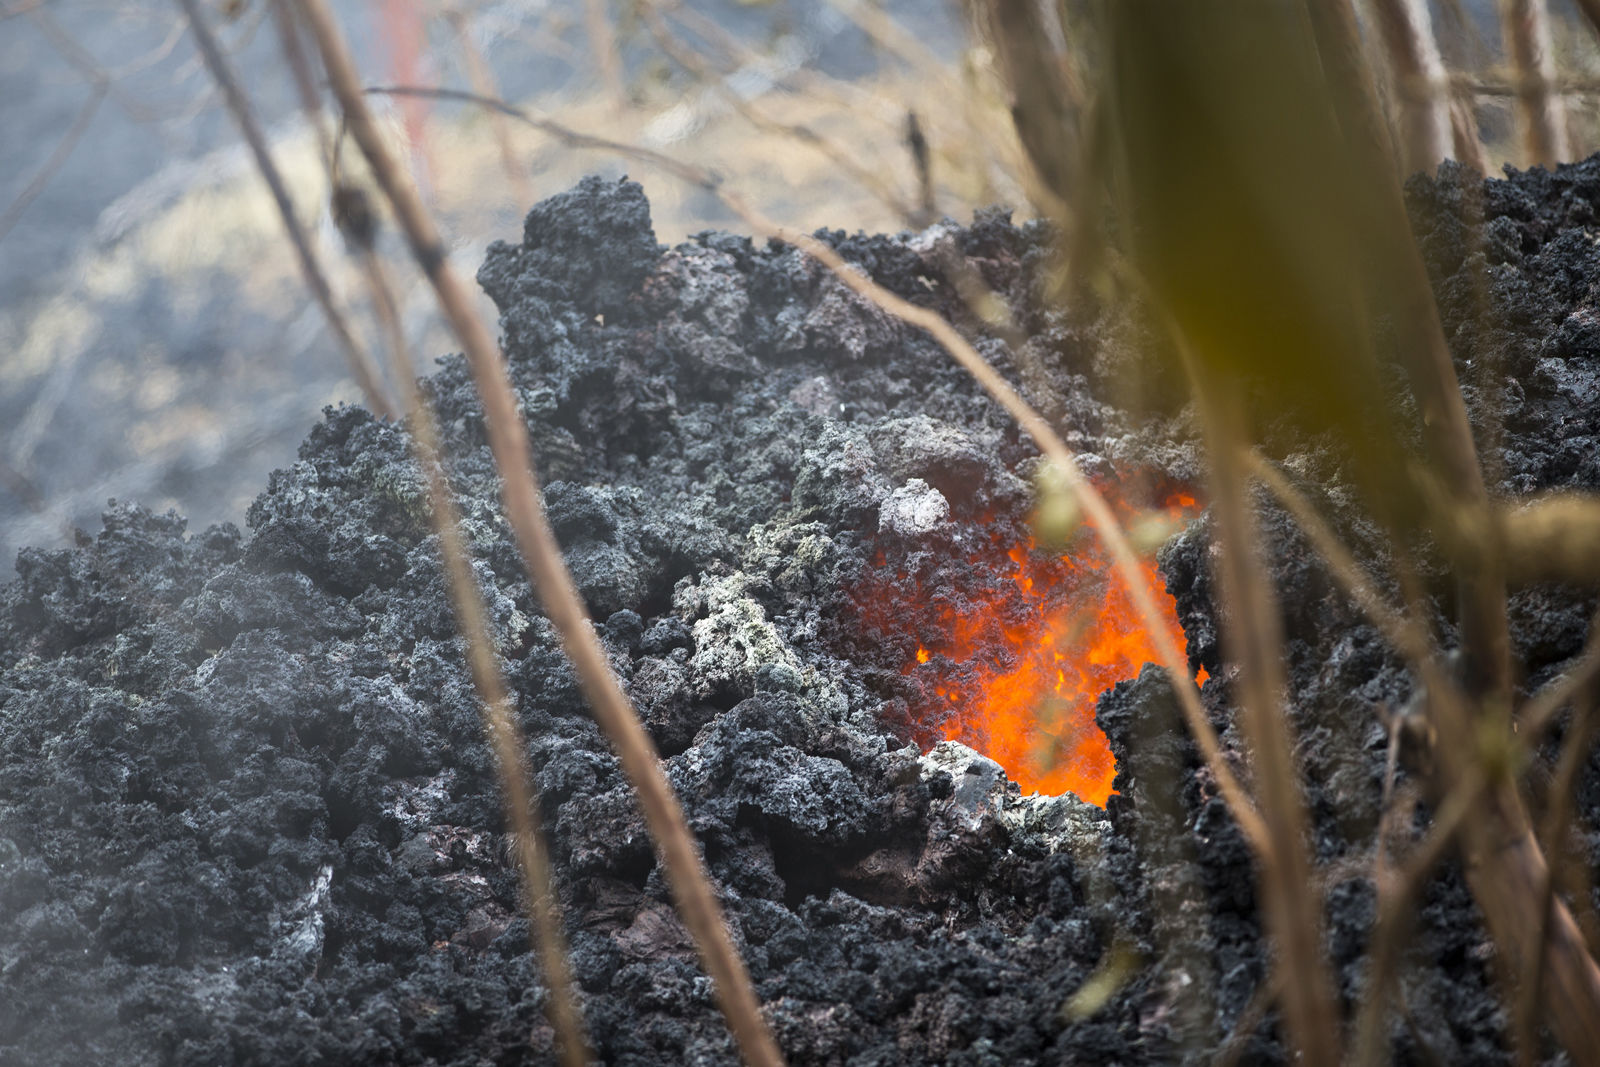 Lava glows from a vent on a lava bed at the Leilani Estates, Saturday, May 5, 2018, in Pahoa, Hawaii. The Hawaiian Volcanoes Observatory said eight volcanic vents opened in the Big Island residential neighborhood of Leilani Estates since Thursday. (AP Photo/Marco Garcia)